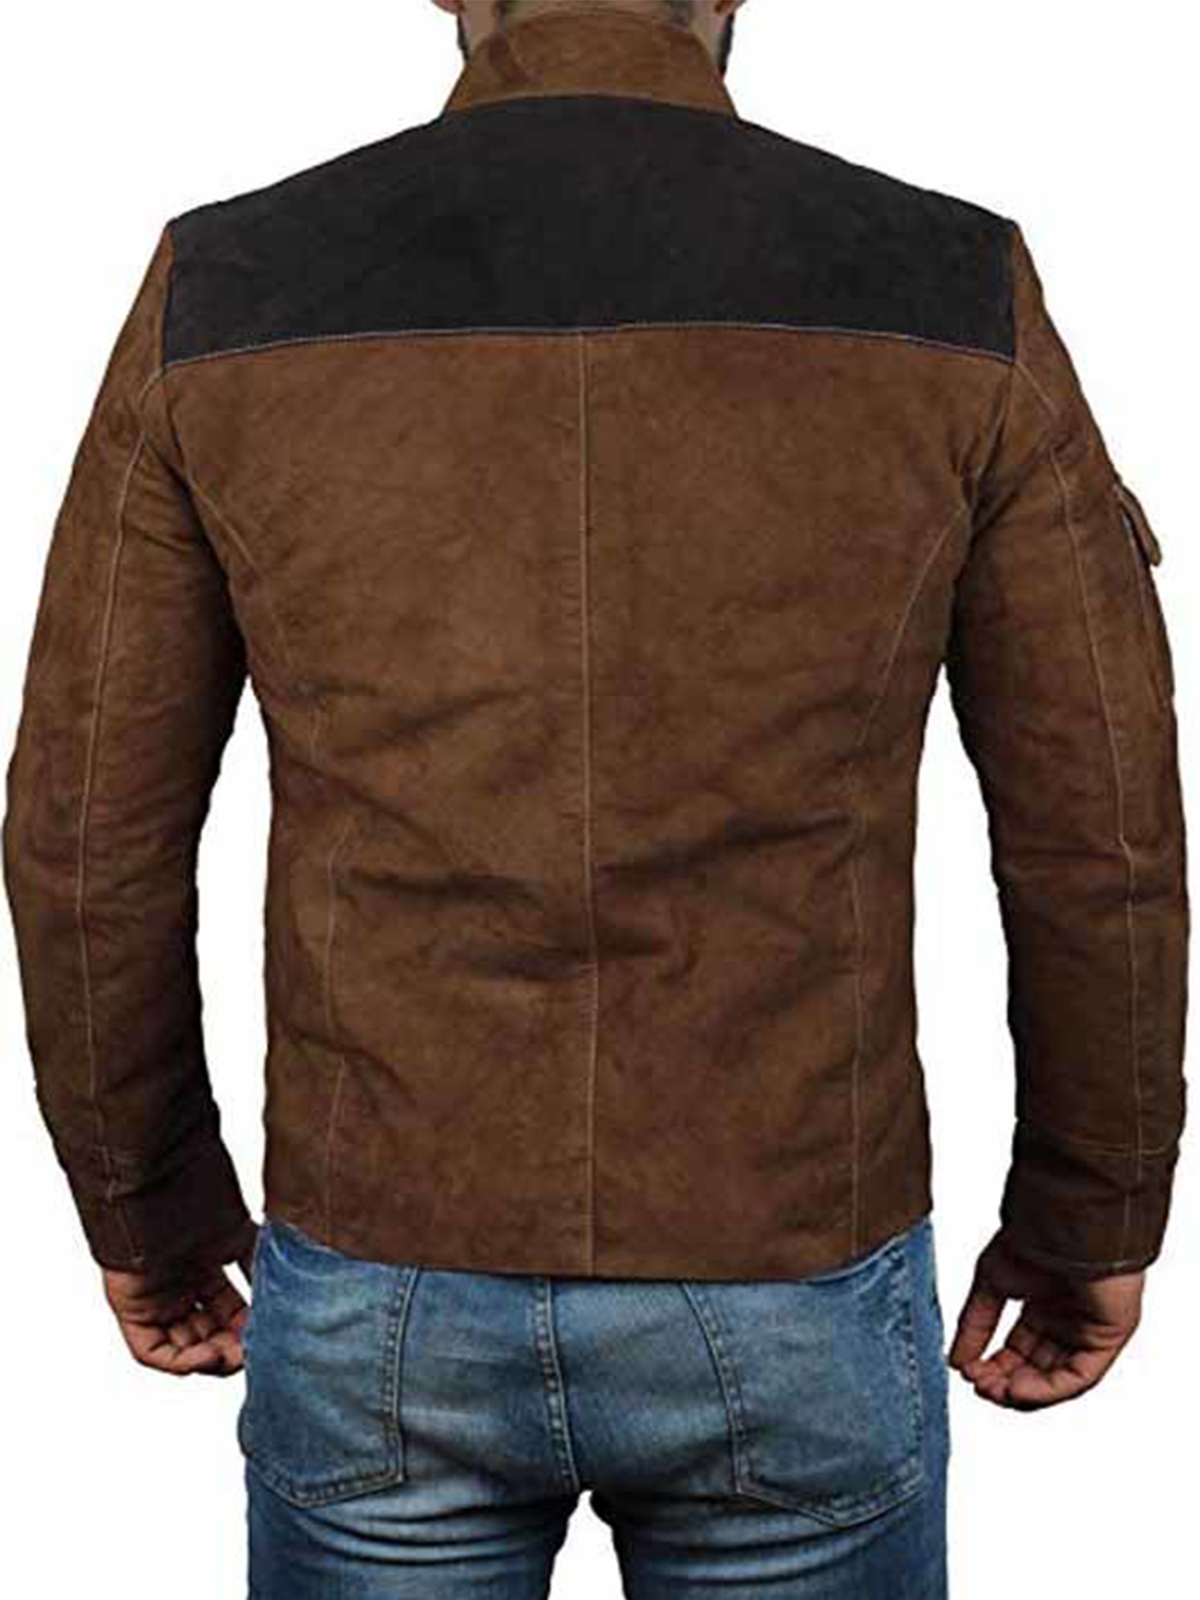 Star Wars Brown Leather Jacket – Bay Perfect